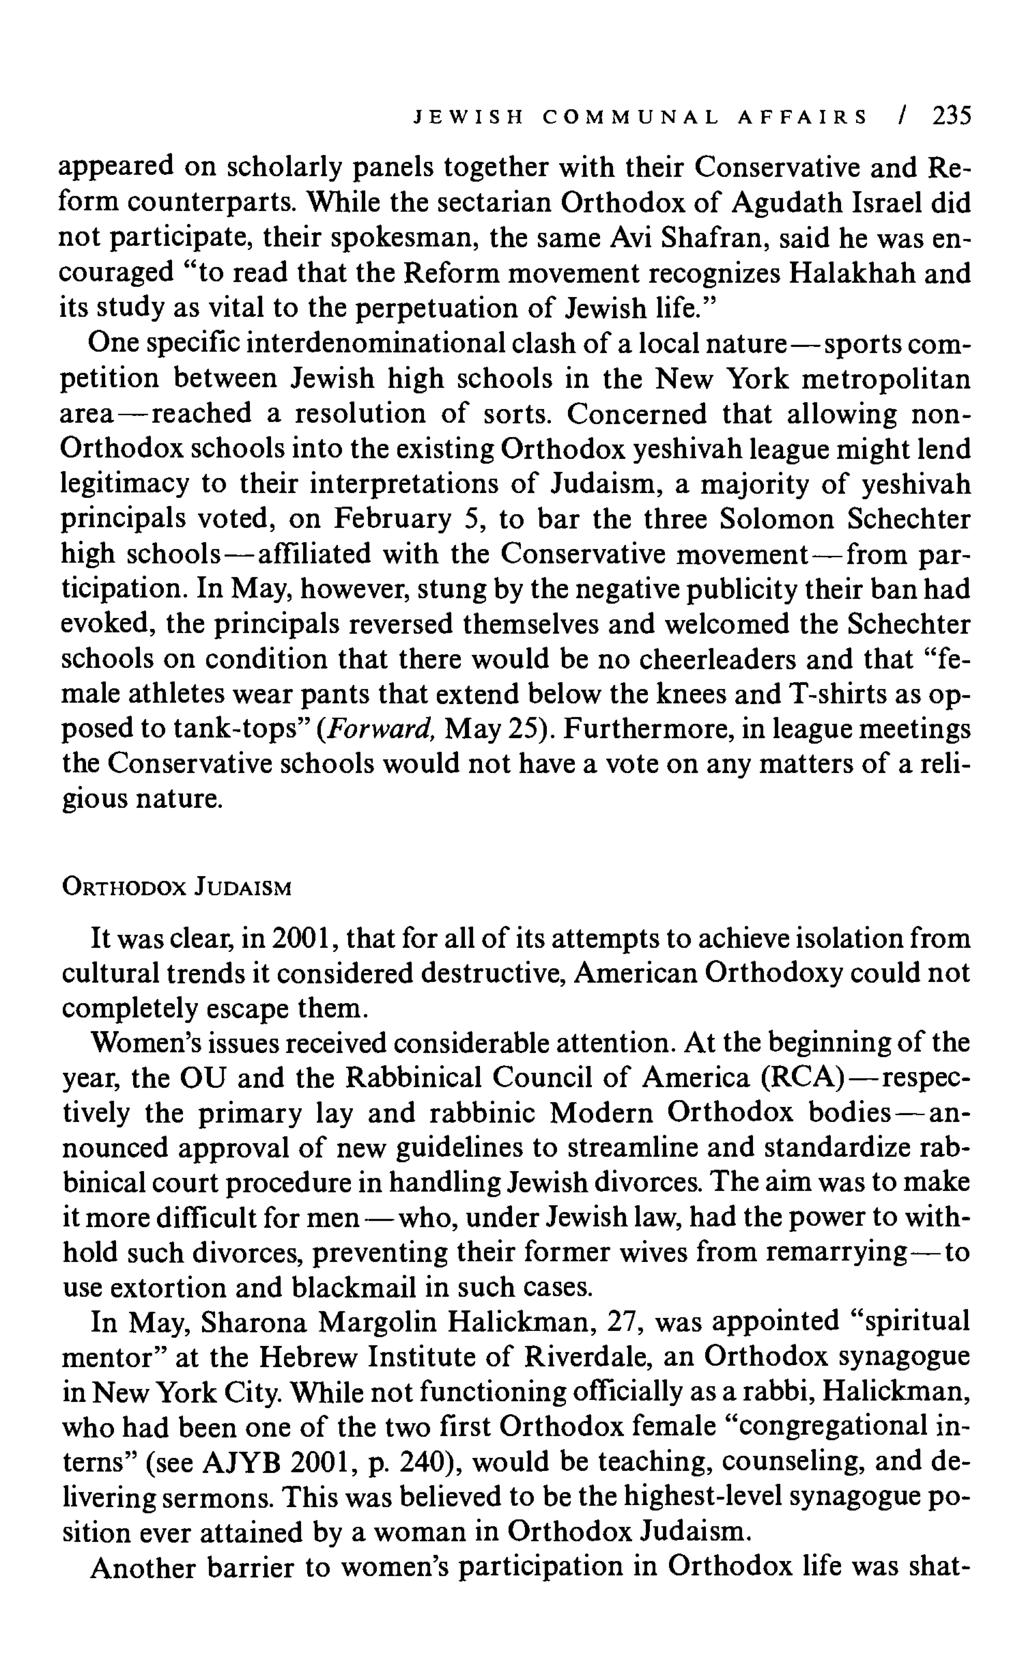 JEWISH COMMUNAL AFFAIRS / 235 appeared on scholarly panels together with their Conservative and Reform counterparts.